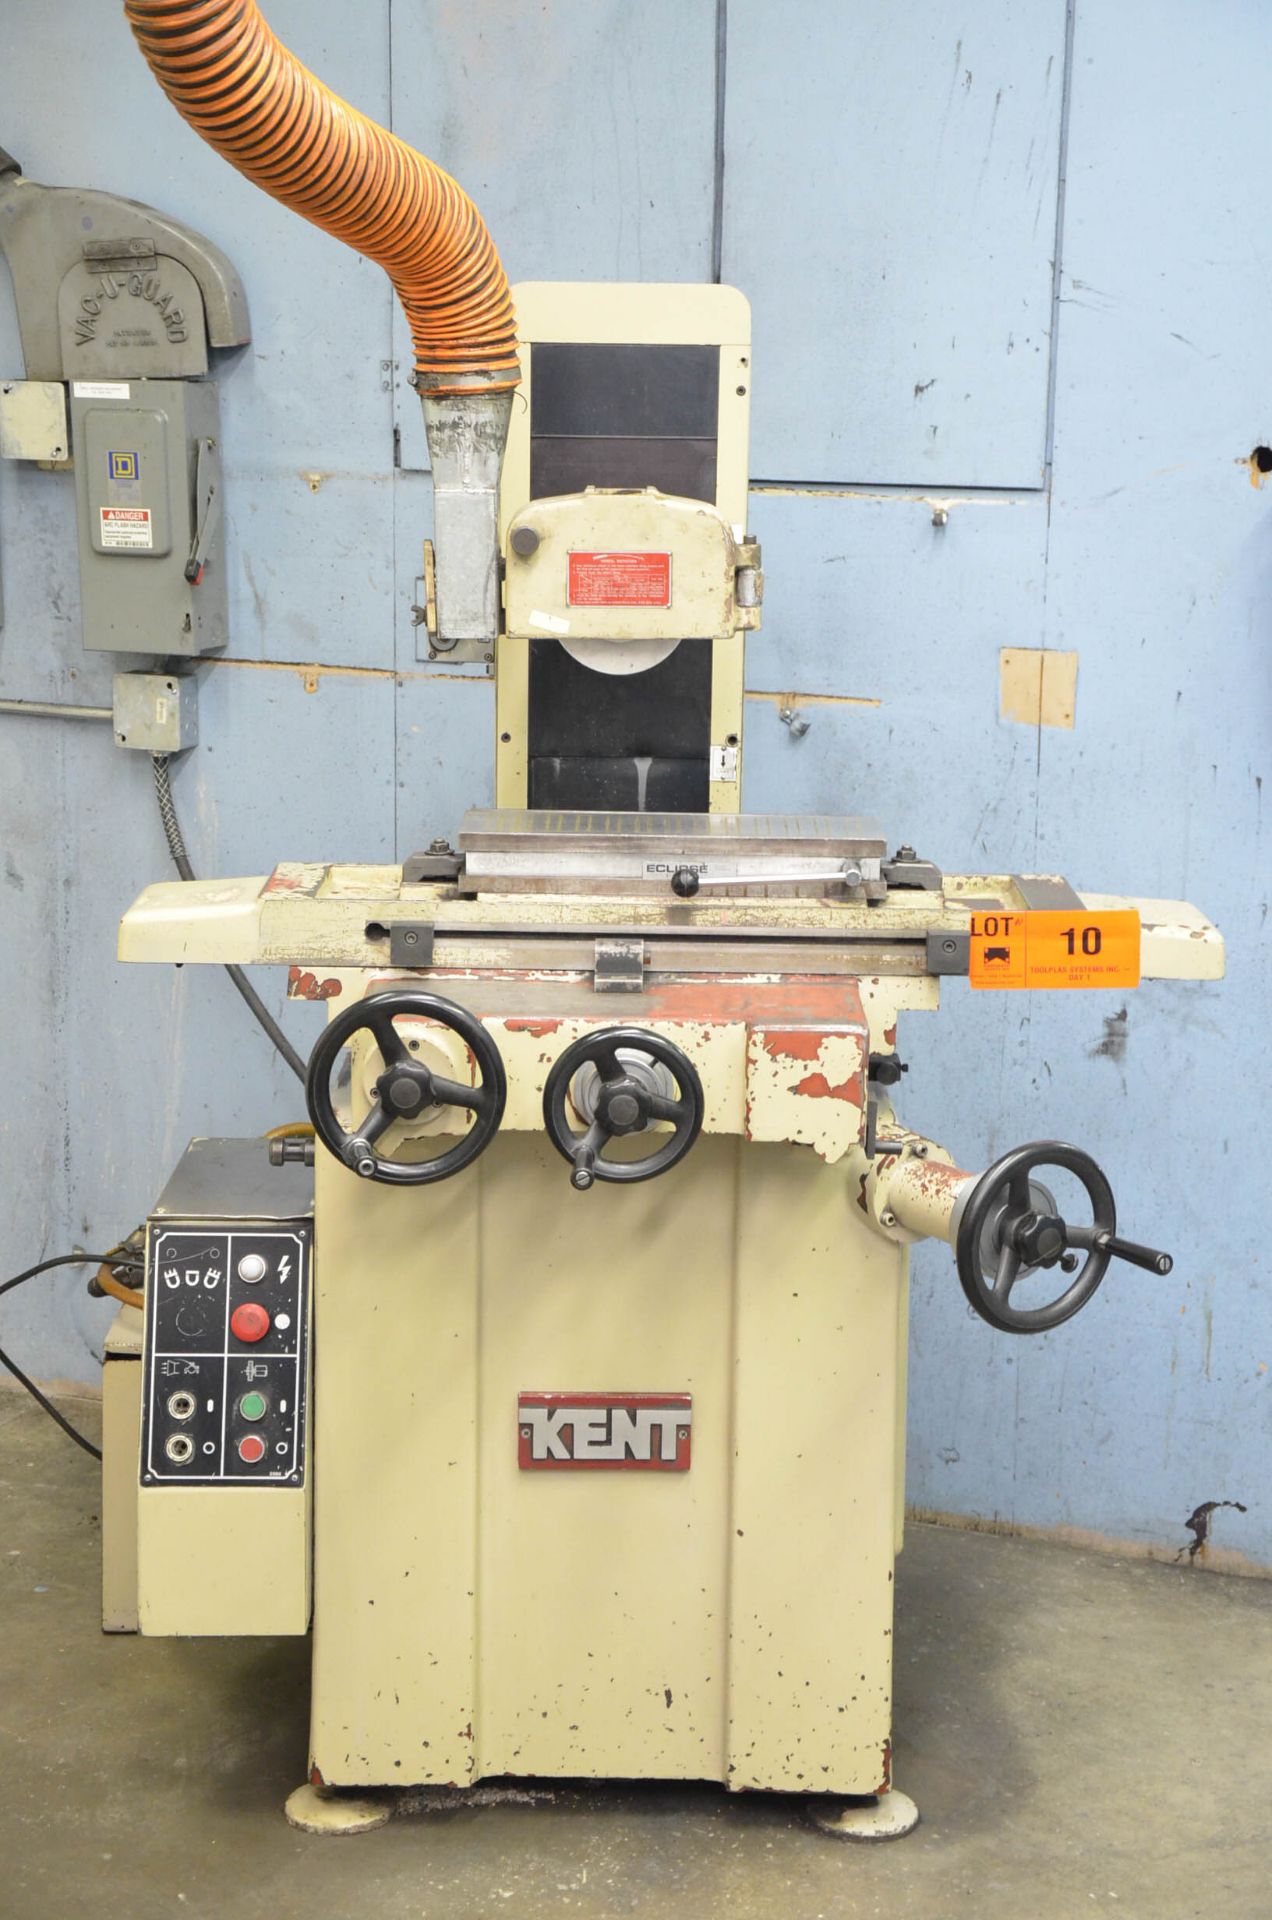 KENT KGS-200 CONVENTIONAL SURFACE GRINDER WITH 6"X18" MAGNETIC CHUCK, 8" WHEEL, INCREMENTAL DOWN- - Image 2 of 4